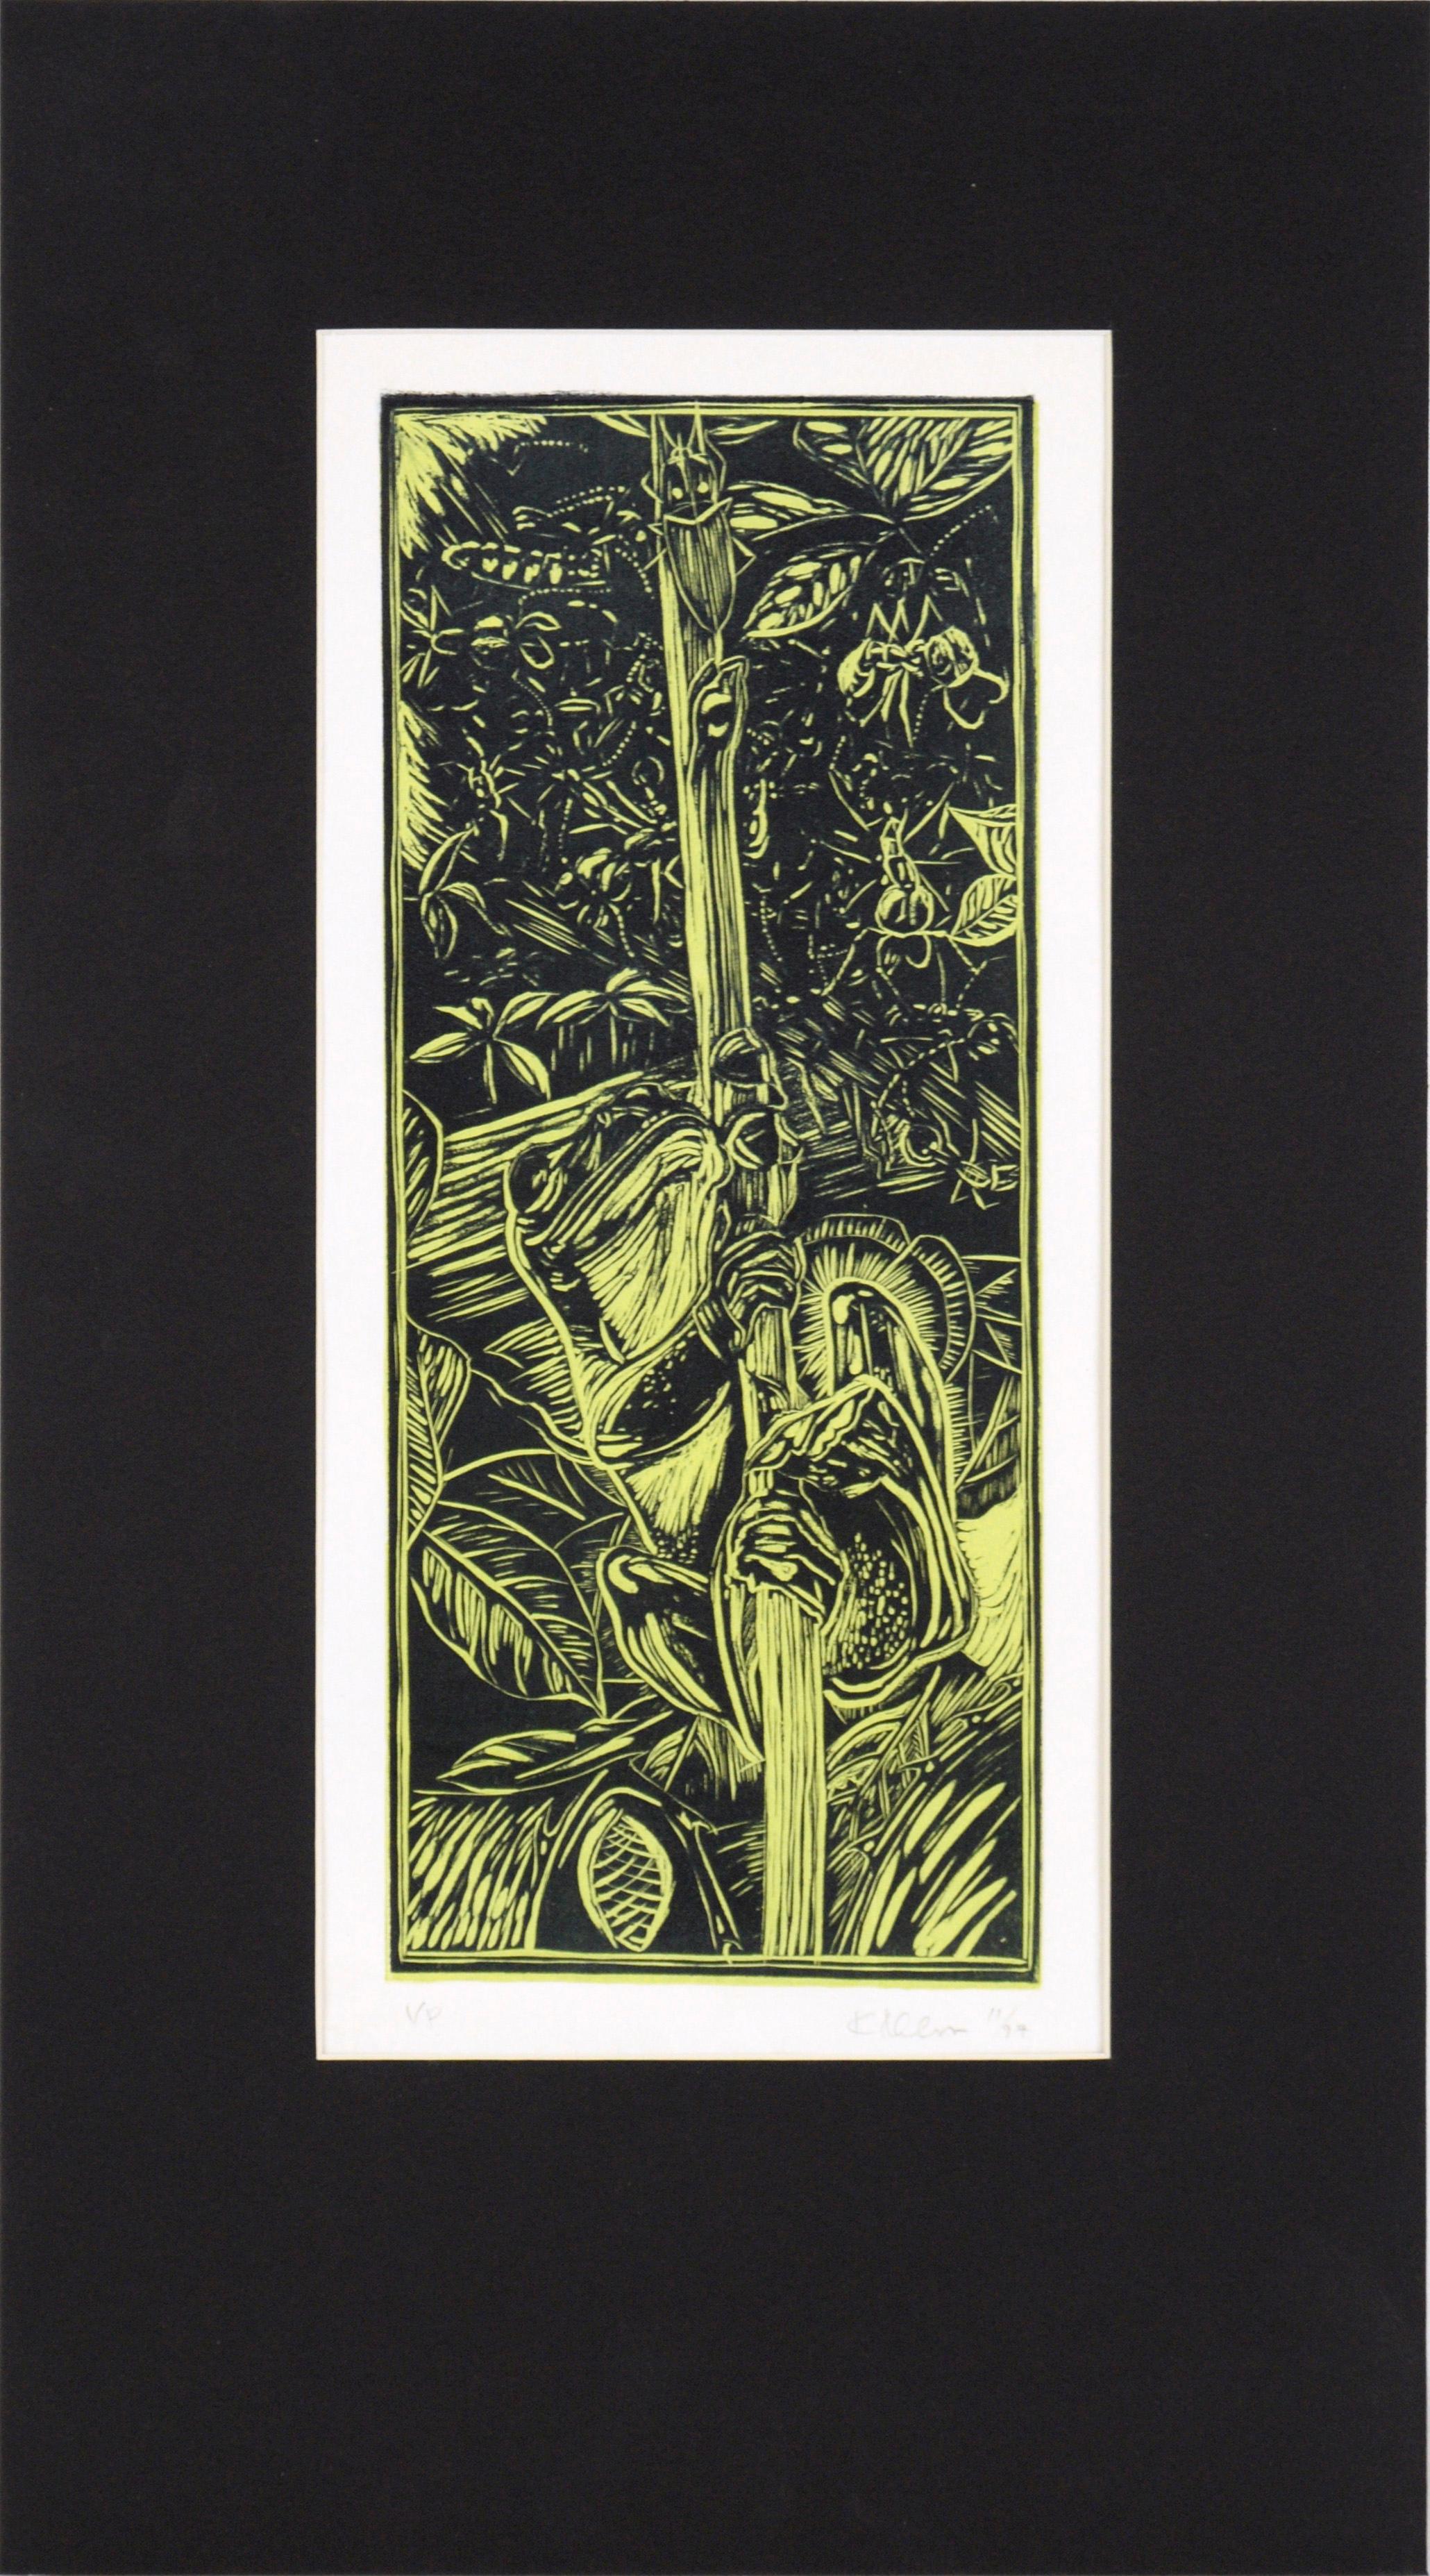 Frog on a Stalk in the Jungle - Linocut Print on Tissue Paper (proof)